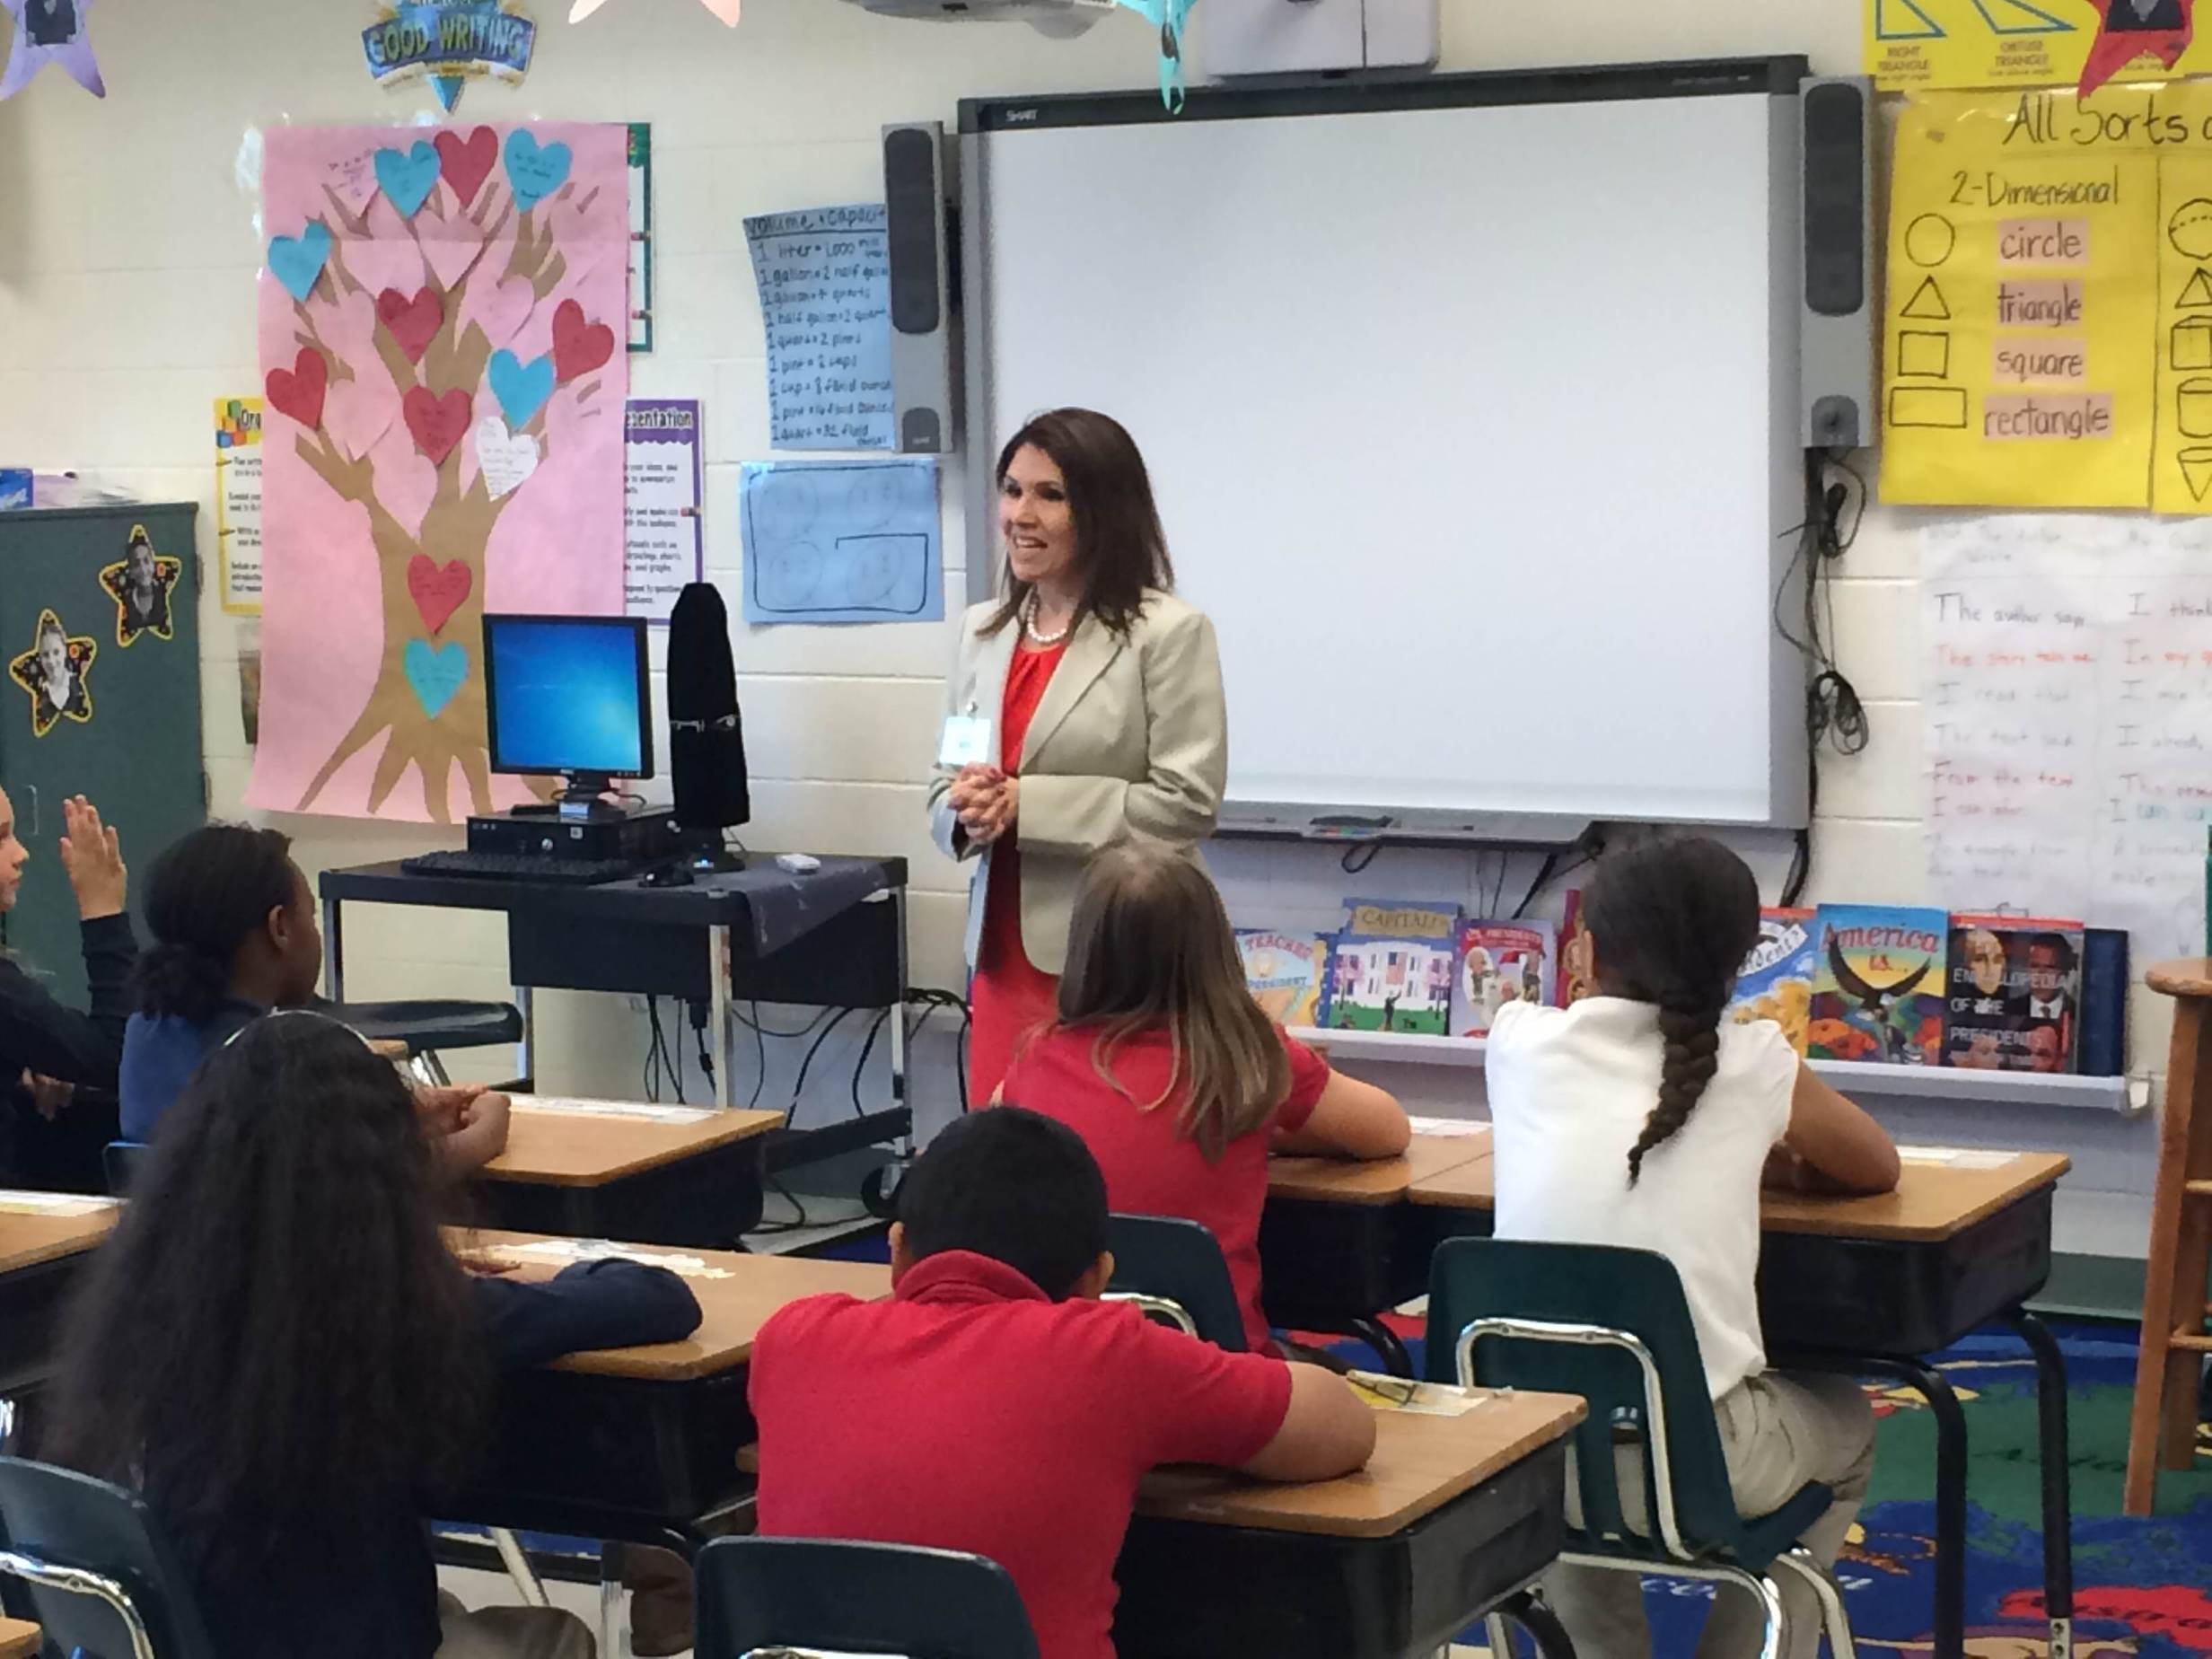 Lt. Governor Sanguinetti stopped by Barkstall Elementary